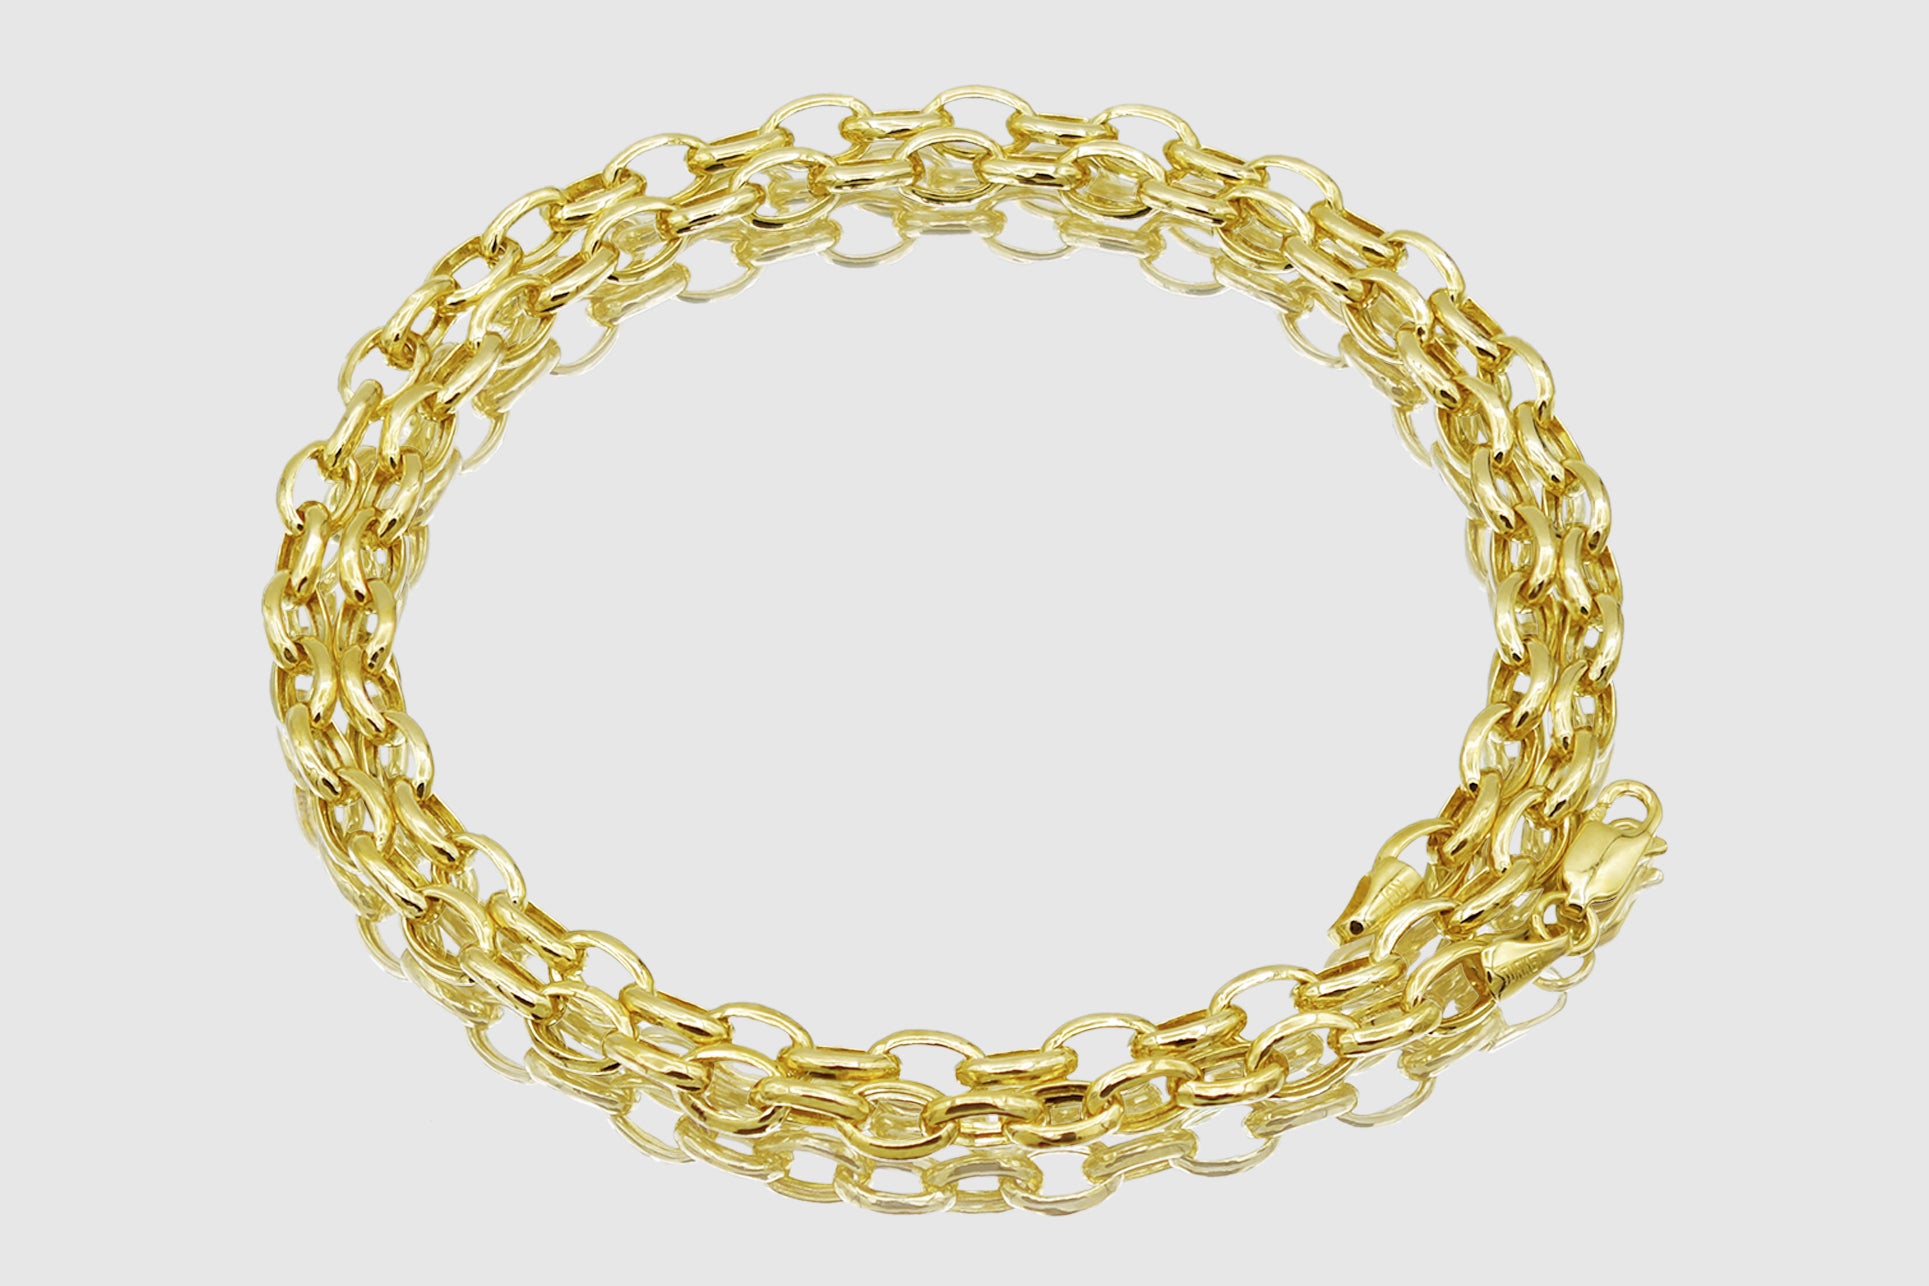 Dainty Oval Rolo 24K Gold Chain by Yard, Gold Oval Link, Wholesale